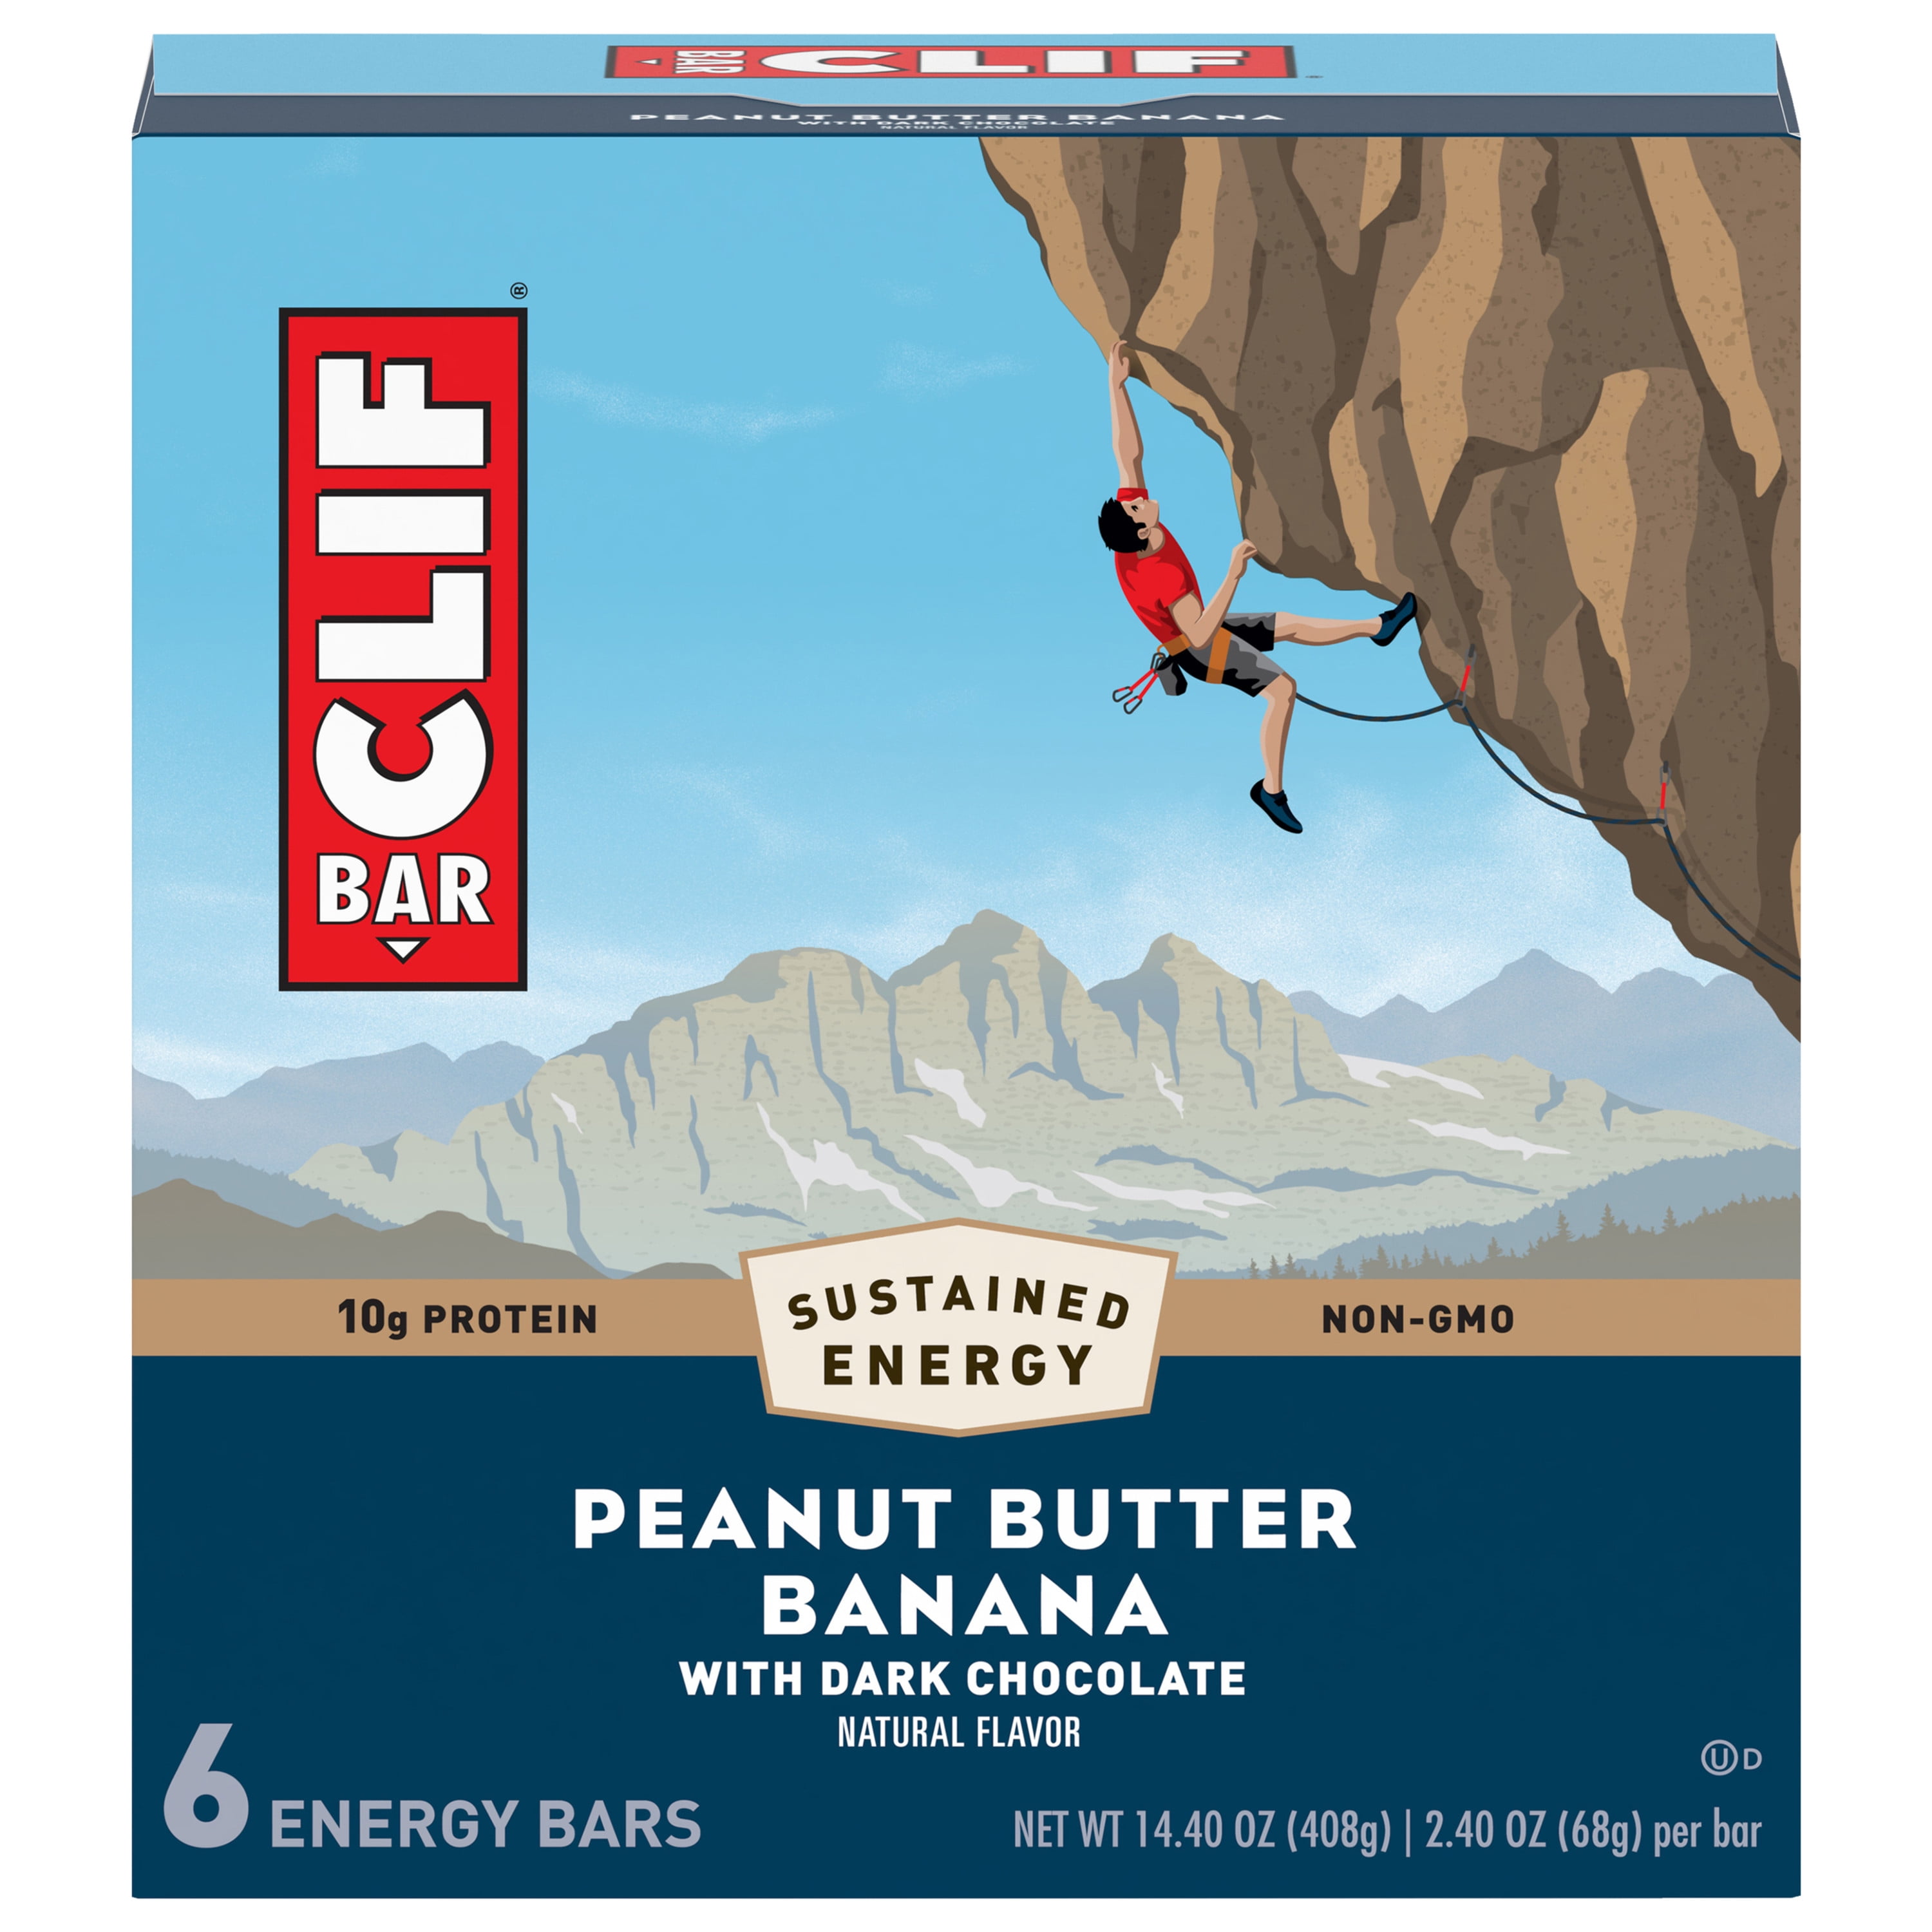 CLIF BAR® Energy Bars, Peanut Butter Banana with Dark Chocolate, 10g Protein Bar, 6 Ct, 2.4 oz (Packaging May Vary)